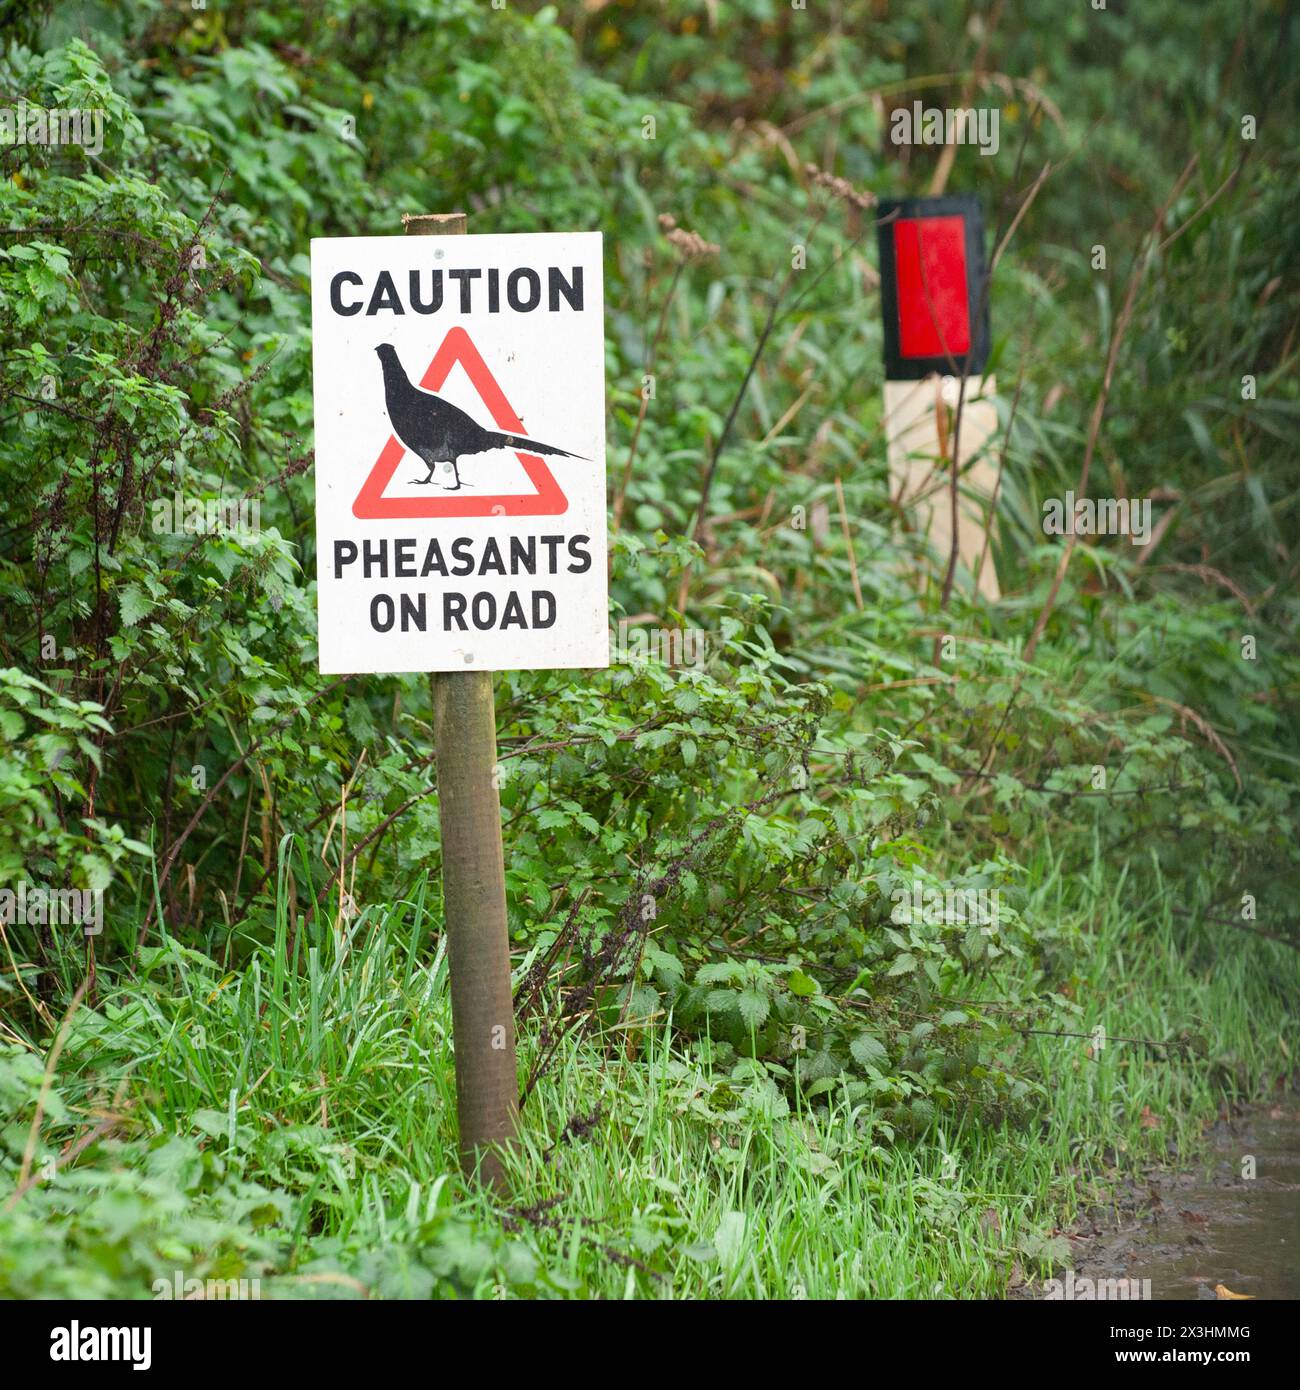 warning sign about pheasants crossing road Stock Photo